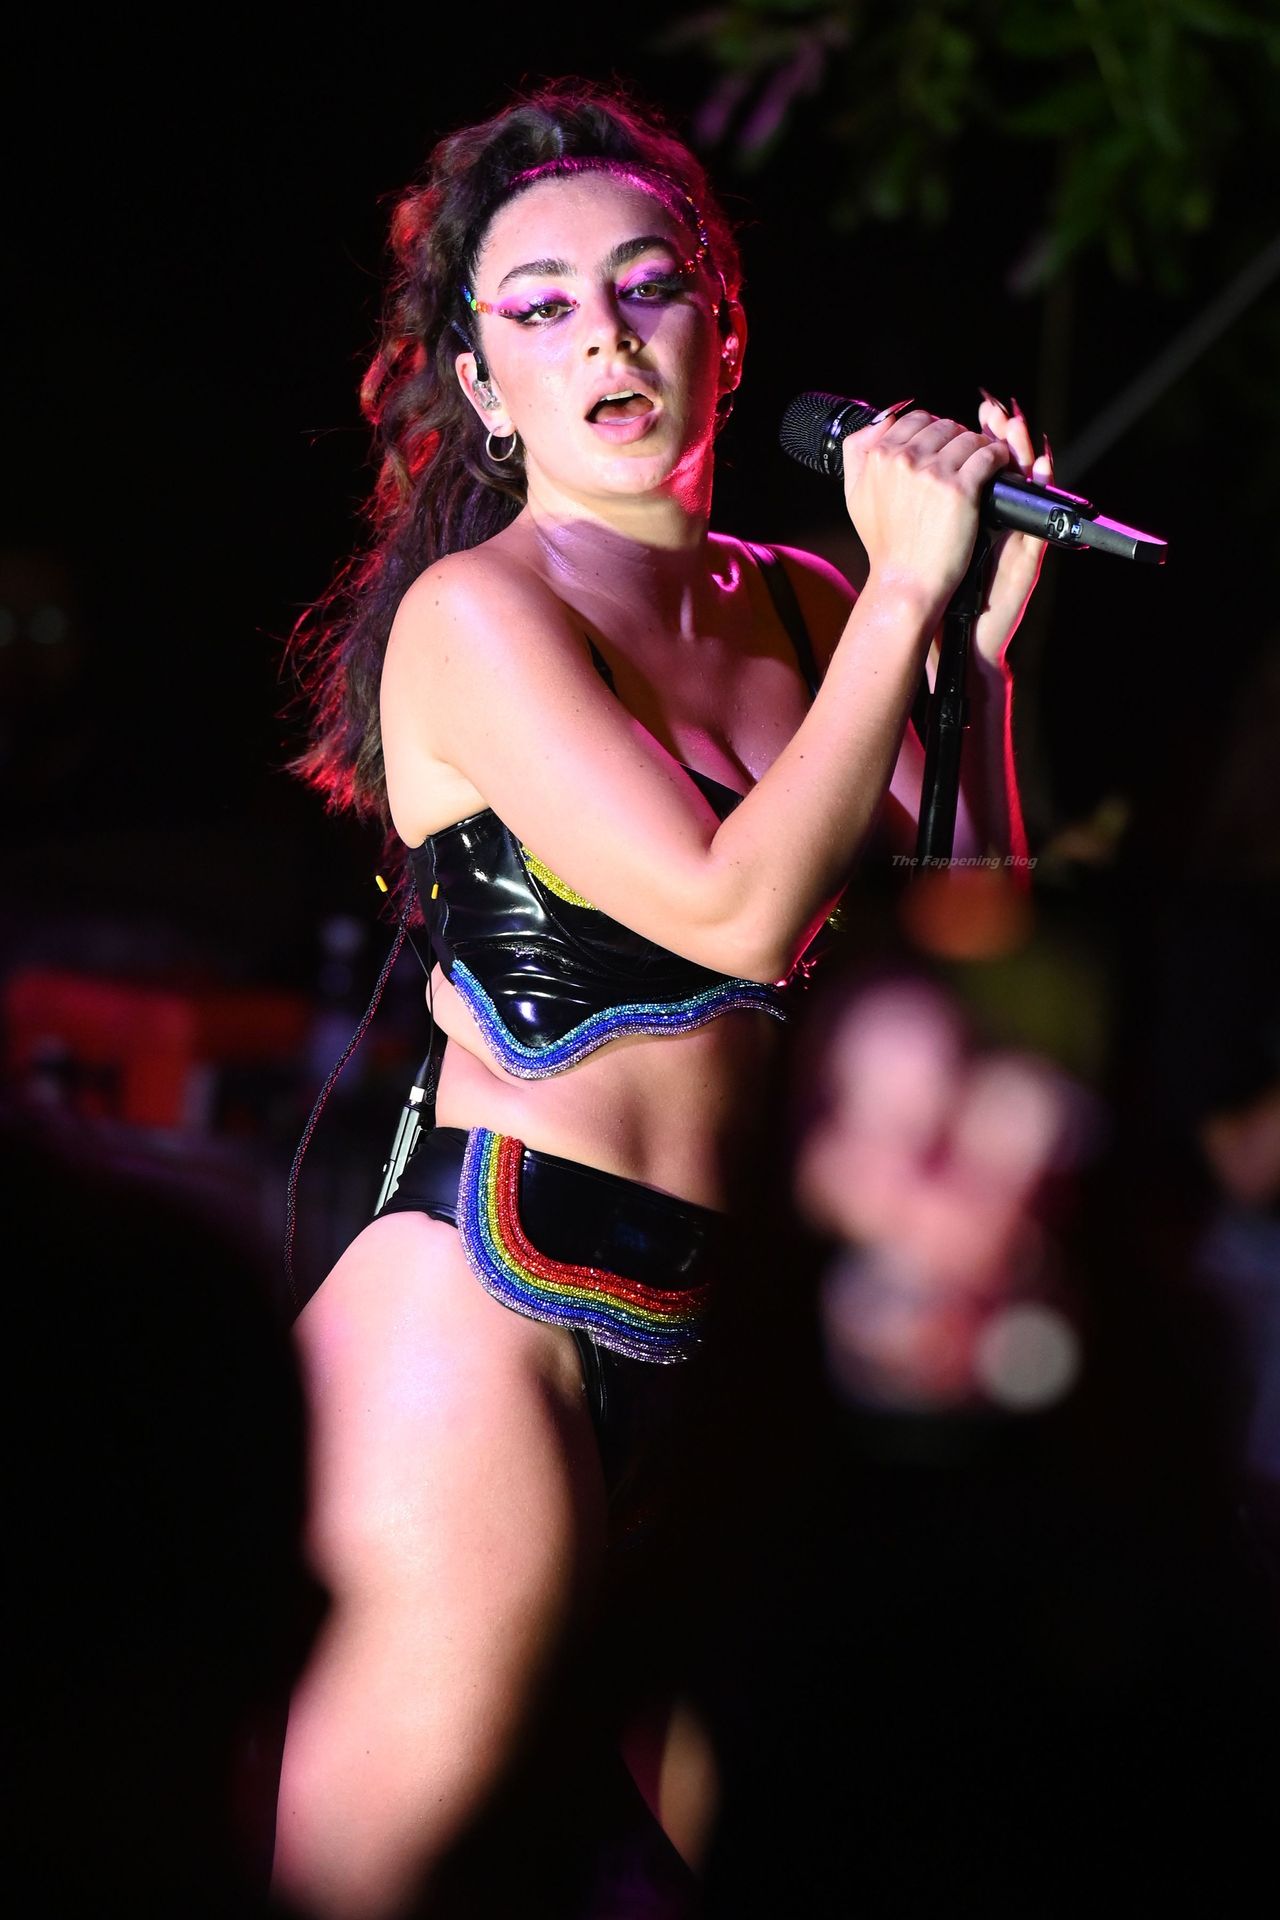 Charli-XCX-Sexy-The-Fappening-Blog-18.jpg